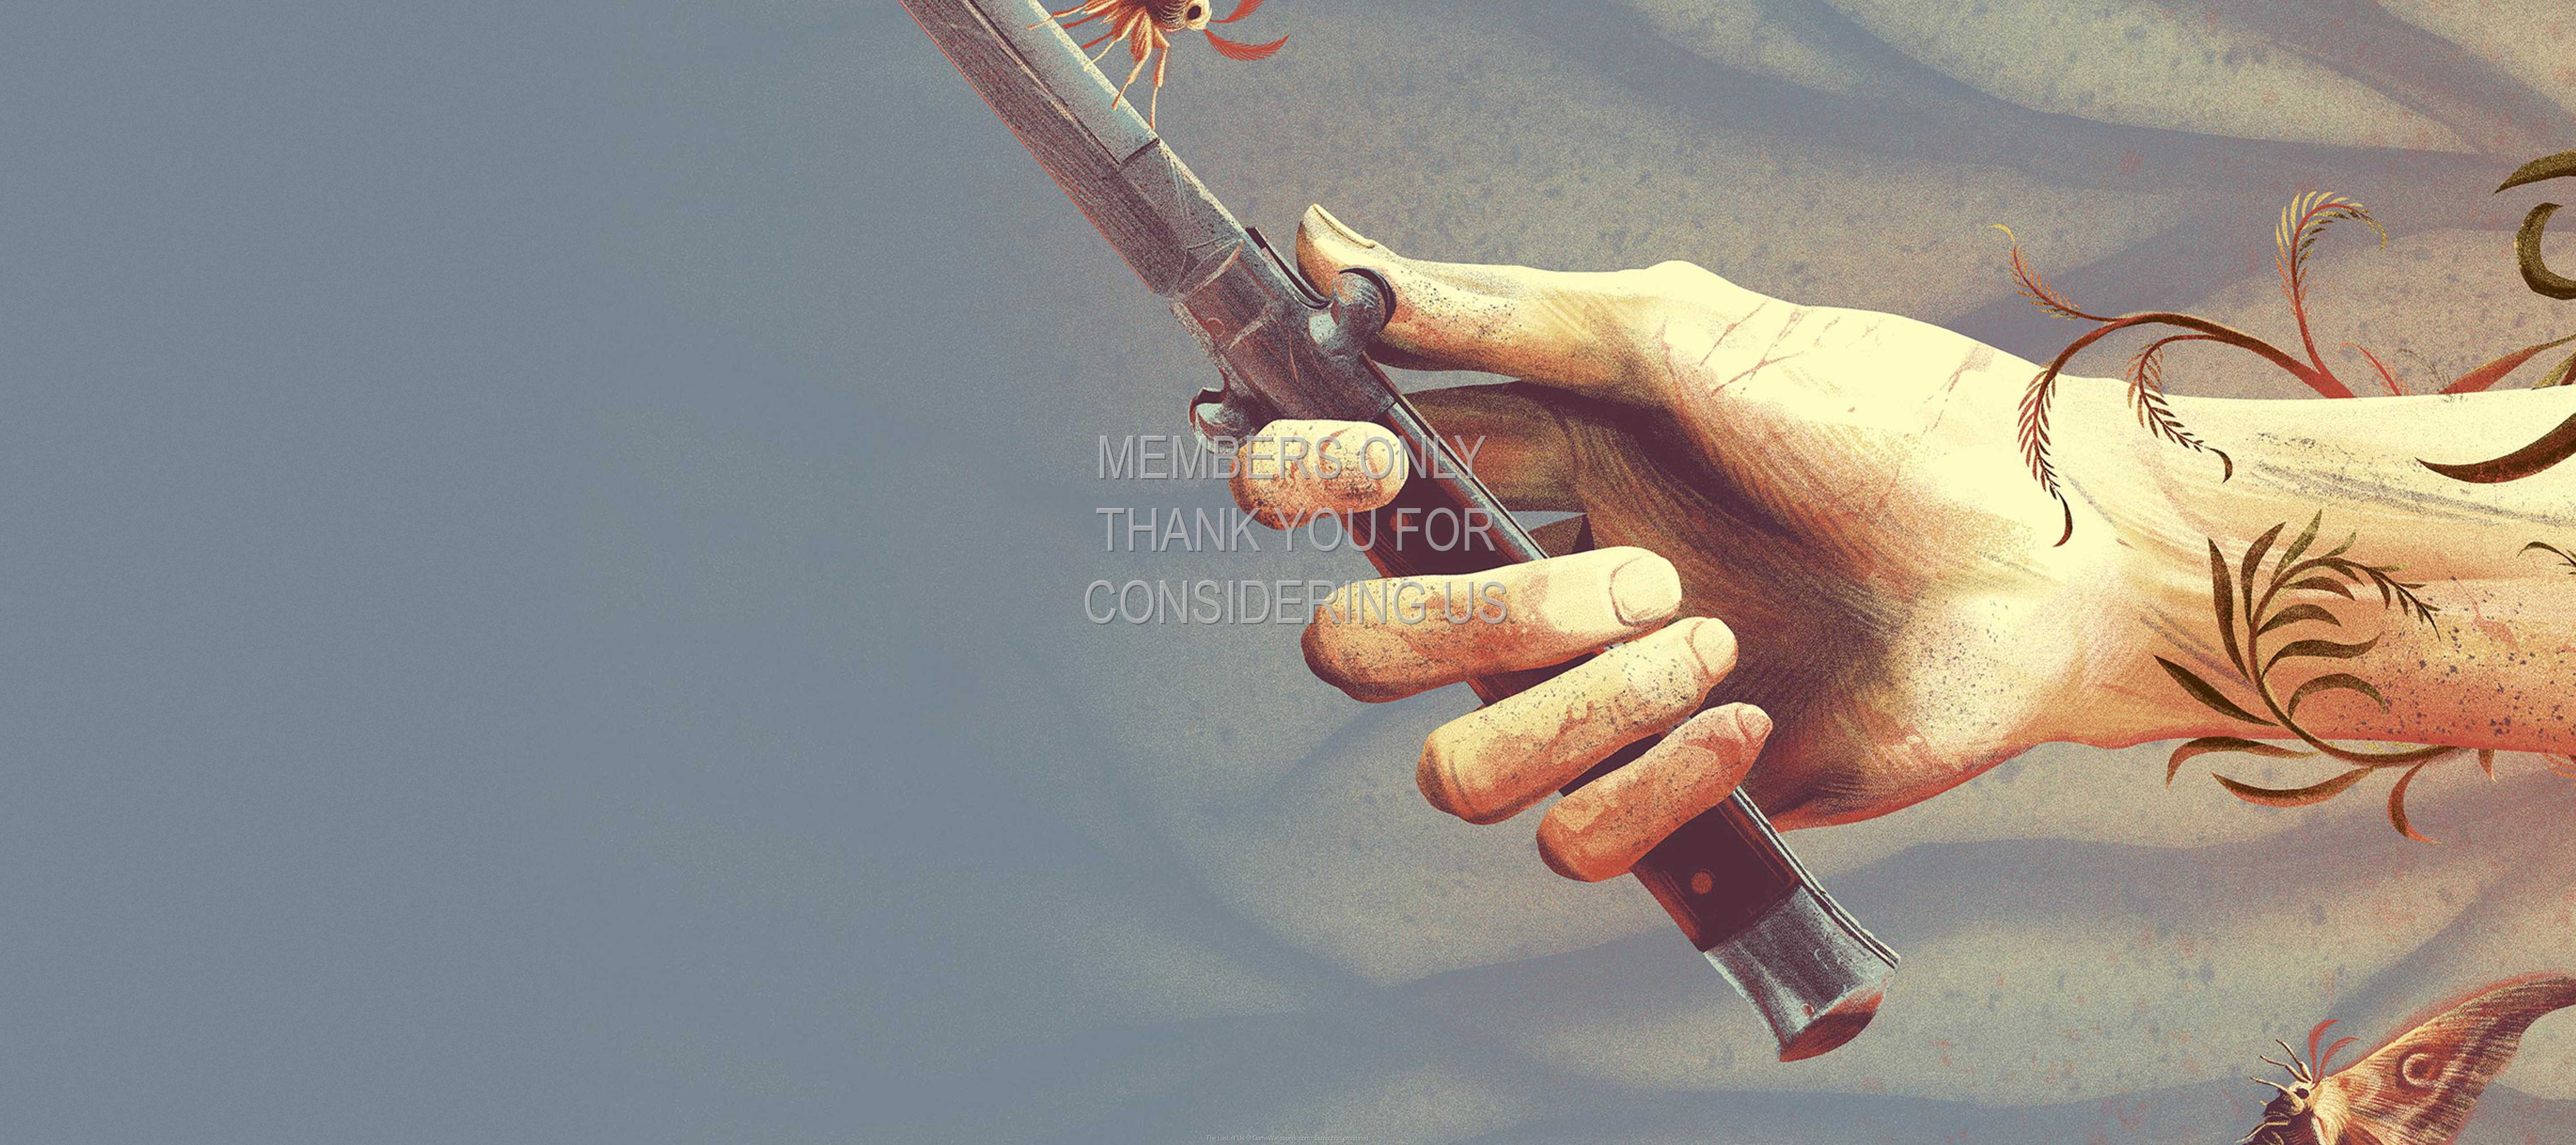 The Last of Us 1440p%20Horizontal Mobile wallpaper or background 24